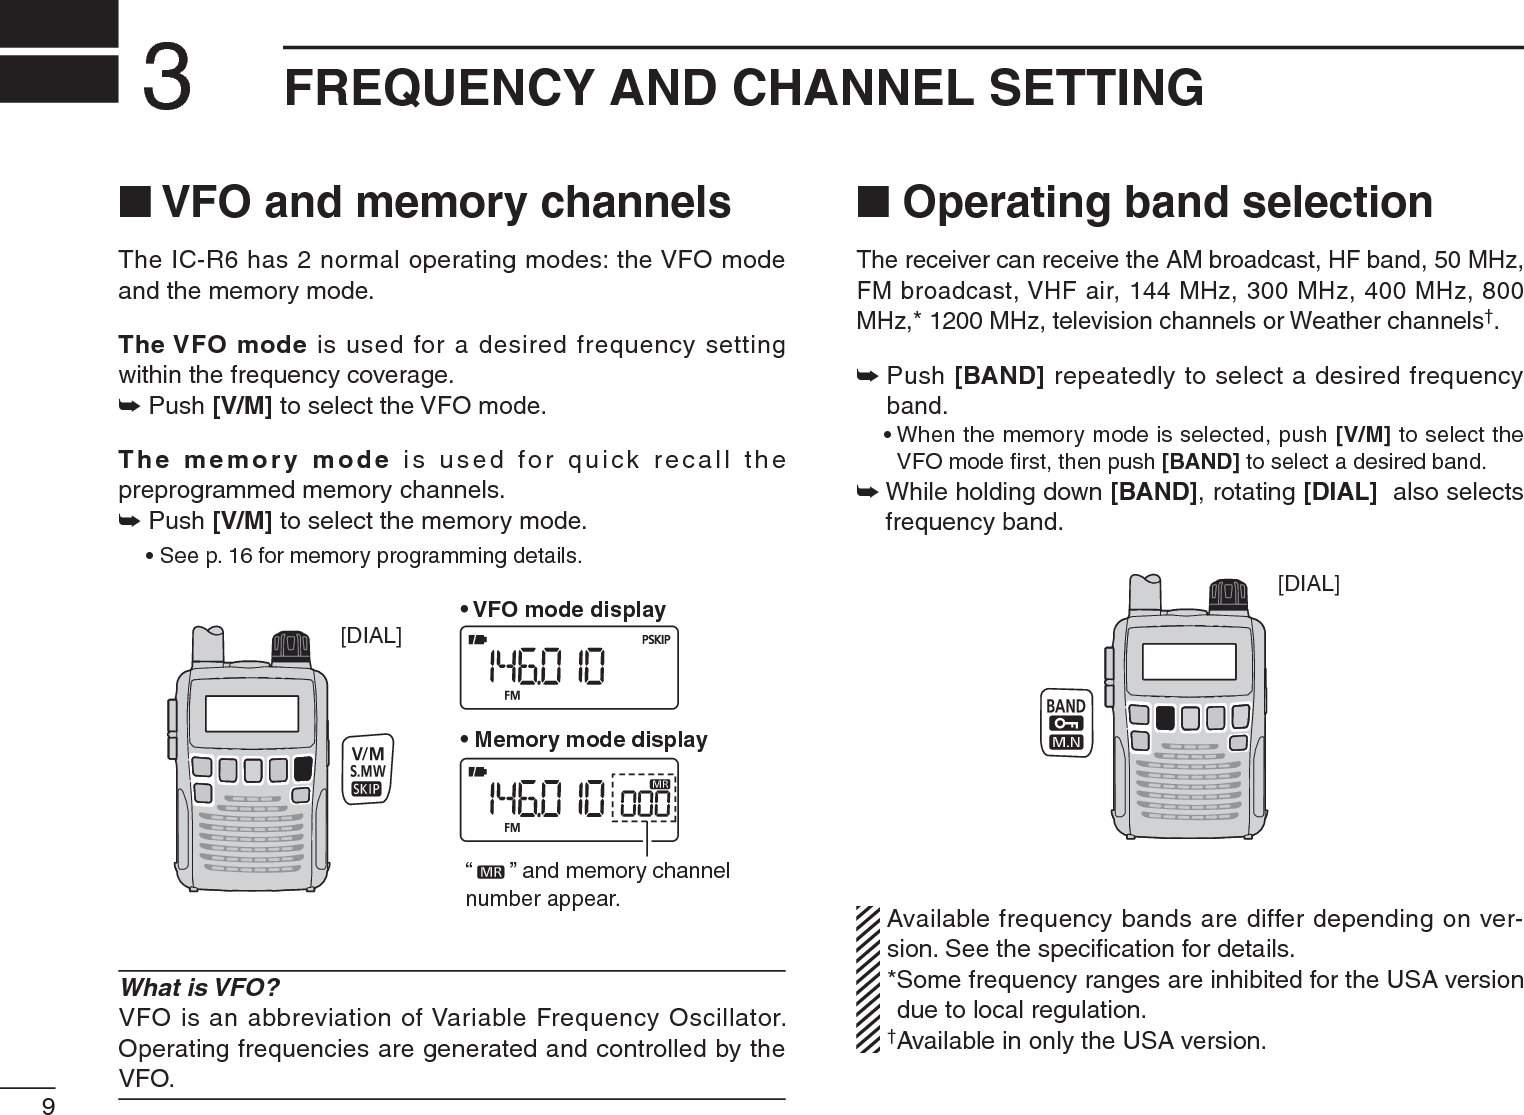 9FREQUENCY AND CHANNEL SETTING3N VFO and memory channelsThe IC-R6 has 2 normal operating modes: the VFO mode and the memory mode.The VFO mode is used for a desired frequency setting within the frequency coverage.± Push [V/M] to select the VFO mode.The memory mode is used for quick recall the preprogrammed memory channels.± Push [V/M] to select the memory mode.• See p. 16 for memory programming details.[DIAL]“ ” and memory channel number appear.• VFO mode display• Memory mode displayWhat is VFO?VFO is an abbreviation of Variable Frequency Oscillator. Operating frequencies are generated and controlled by the VFO.N Operating band selectionThe receiver can receive the AM broadcast, HF band, 50 MHz, FM broadcast, VHF air, 144 MHz, 300 MHz, 400 MHz, 800 MHz,* 1200 MHz, television channels or Weather channels†.±Push [BAND] repeatedly to select a desired frequency band.• When the memory mode is selected, push [V/M] to select the VFO mode ﬁrst, then push [BAND] to select a desired band.±While holding down [BAND], rotating [DIAL]  also selects frequency band.[DIAL]Available frequency bands are differ depending on ver-sion. See the speciﬁcation for details. *Some frequency ranges are inhibited for the USA version due to local regulation.†Available in only the USA version.